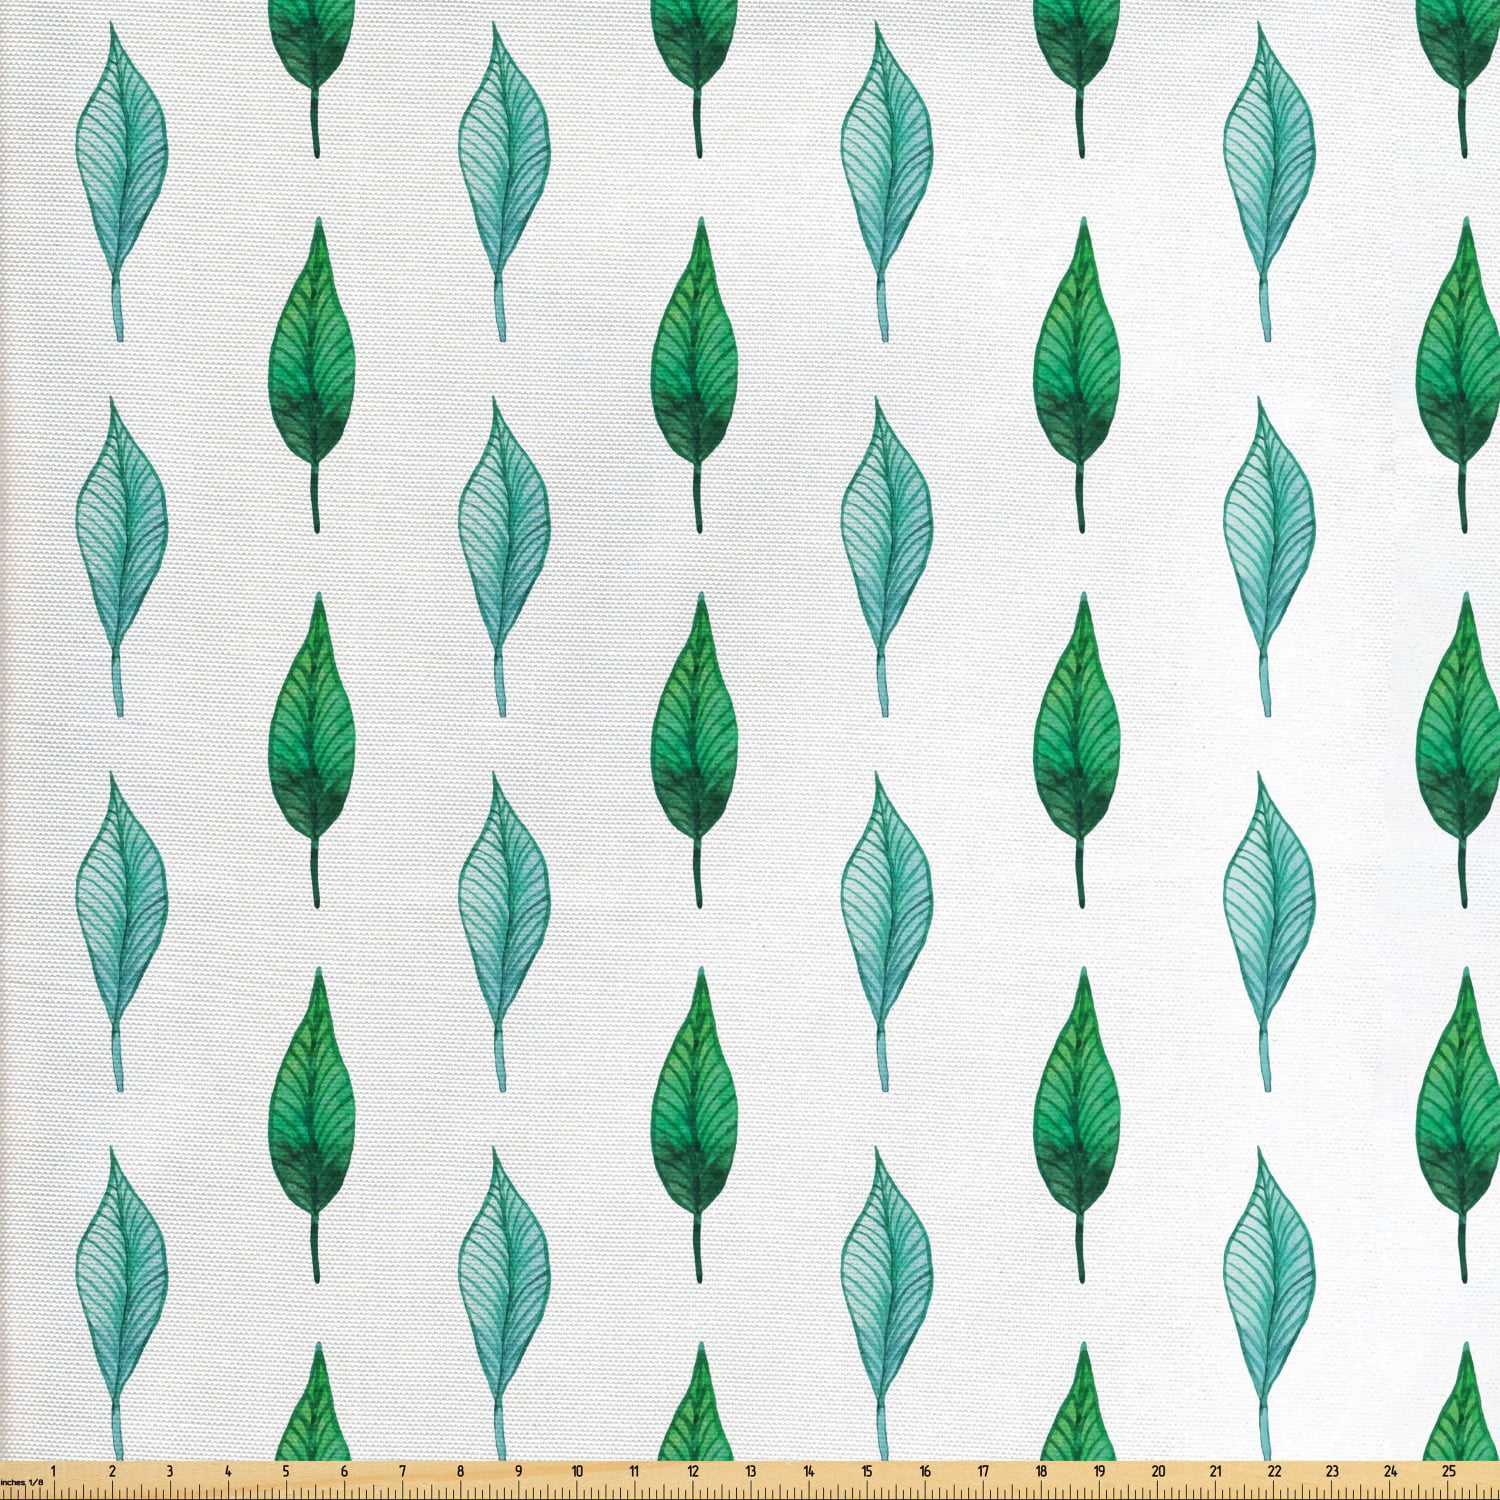 Leaves Upholstery Fabric By The Yard Botanical Watercolor Pattern With